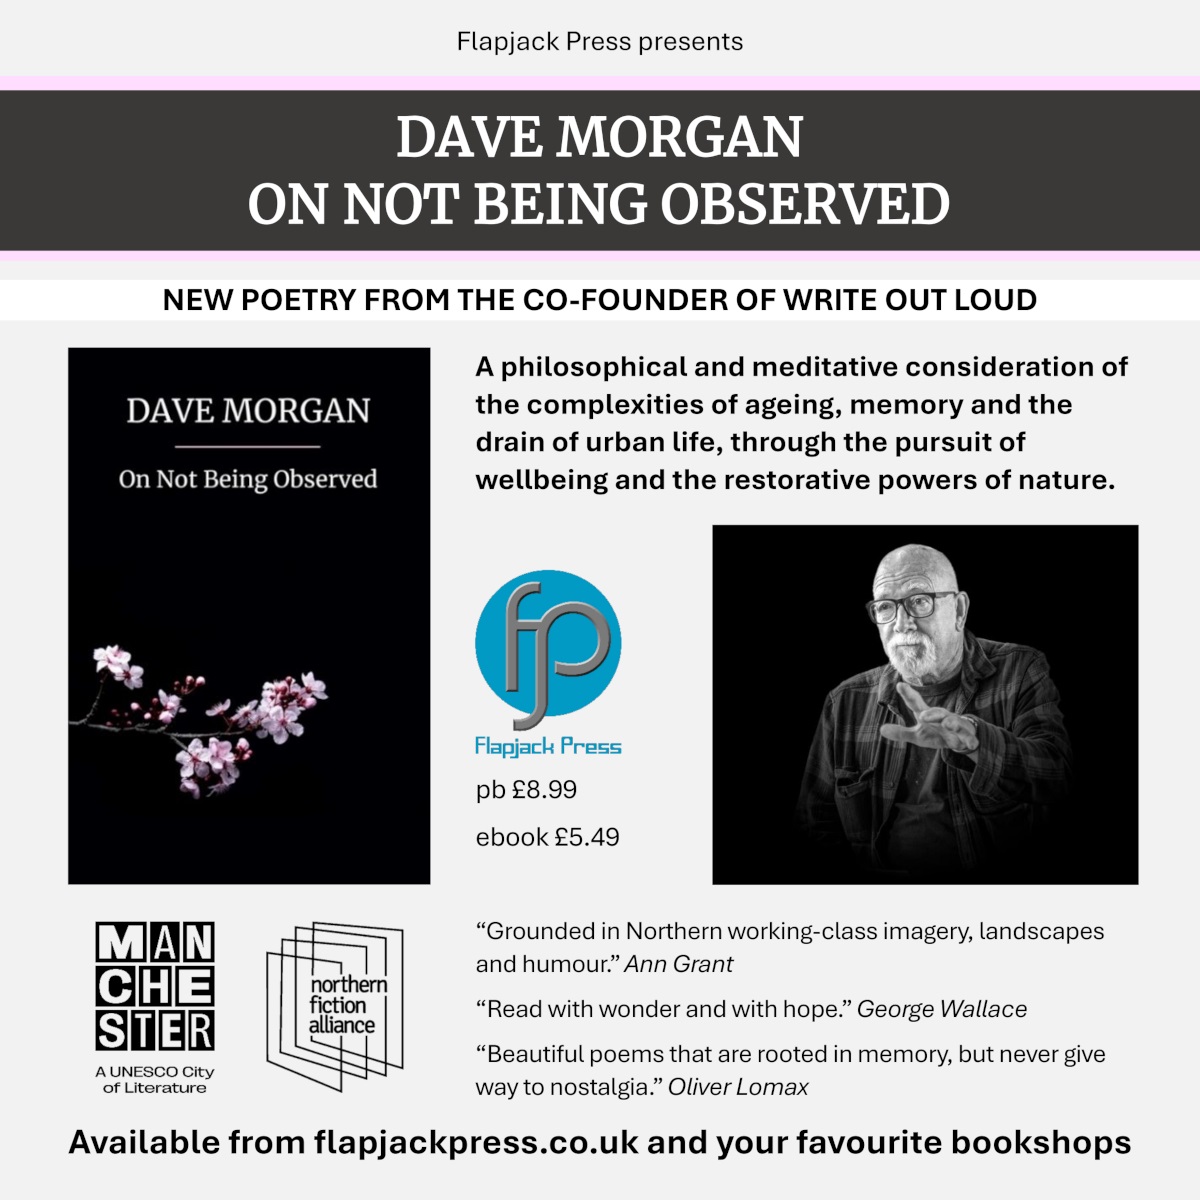 Order your copy of On Not Being Observed now, the brand new #poetry collection by Dave Morgan. Available from flapjackpress.co.uk and your favourite bookshops. 'Morgan writes with a mystical sensibility that resonates universally.' Oliver Lomax #Wellbeing #Memory